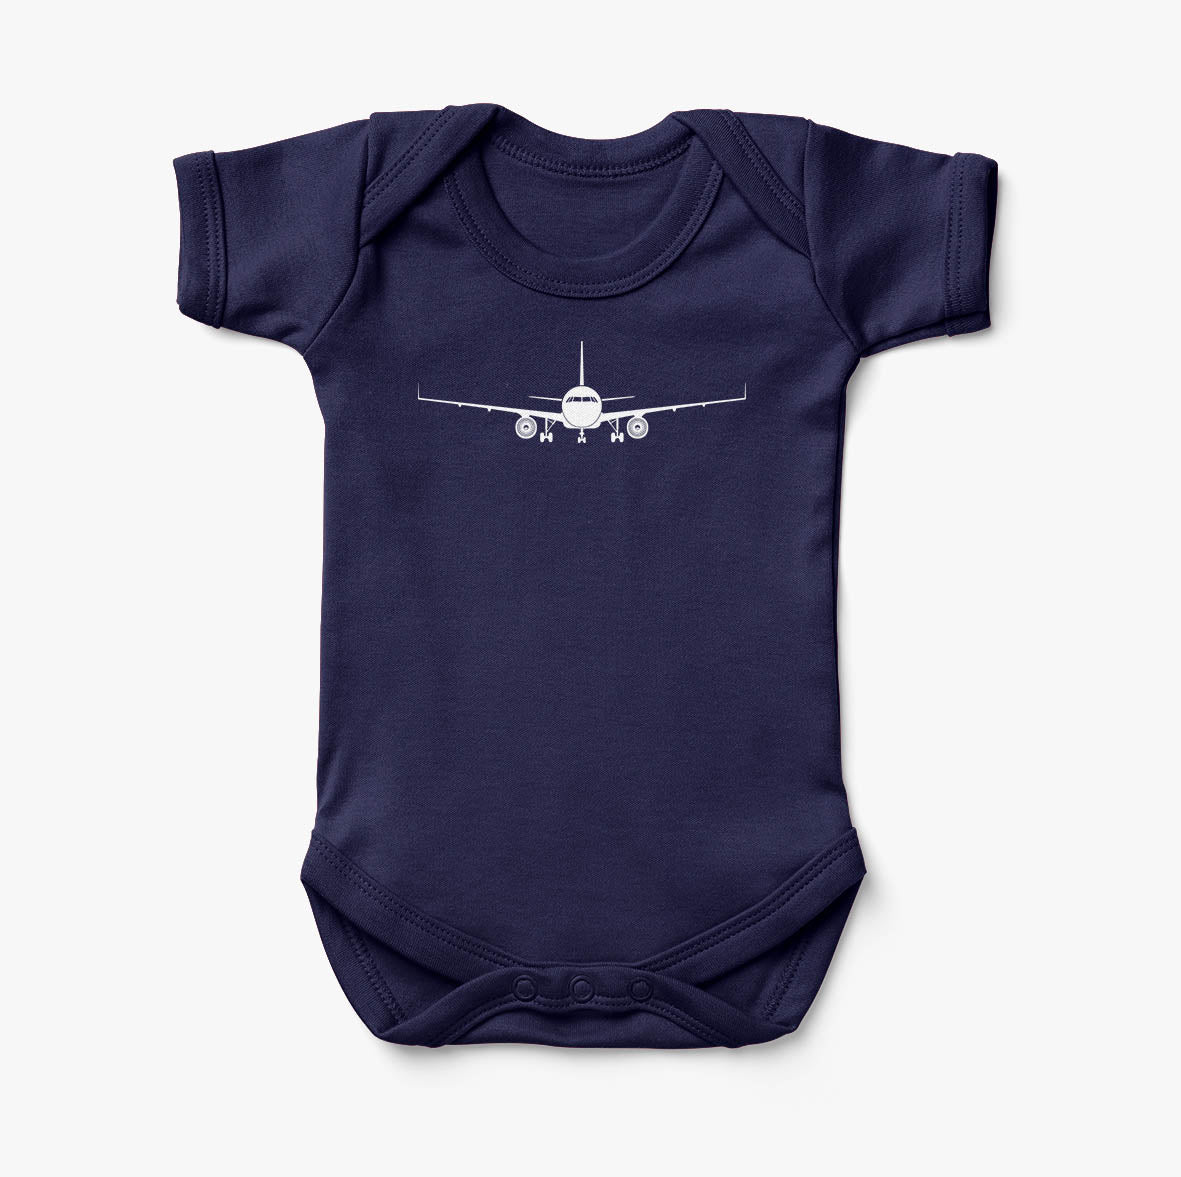 Airbus A320 Silhouette Designed Baby Bodysuits